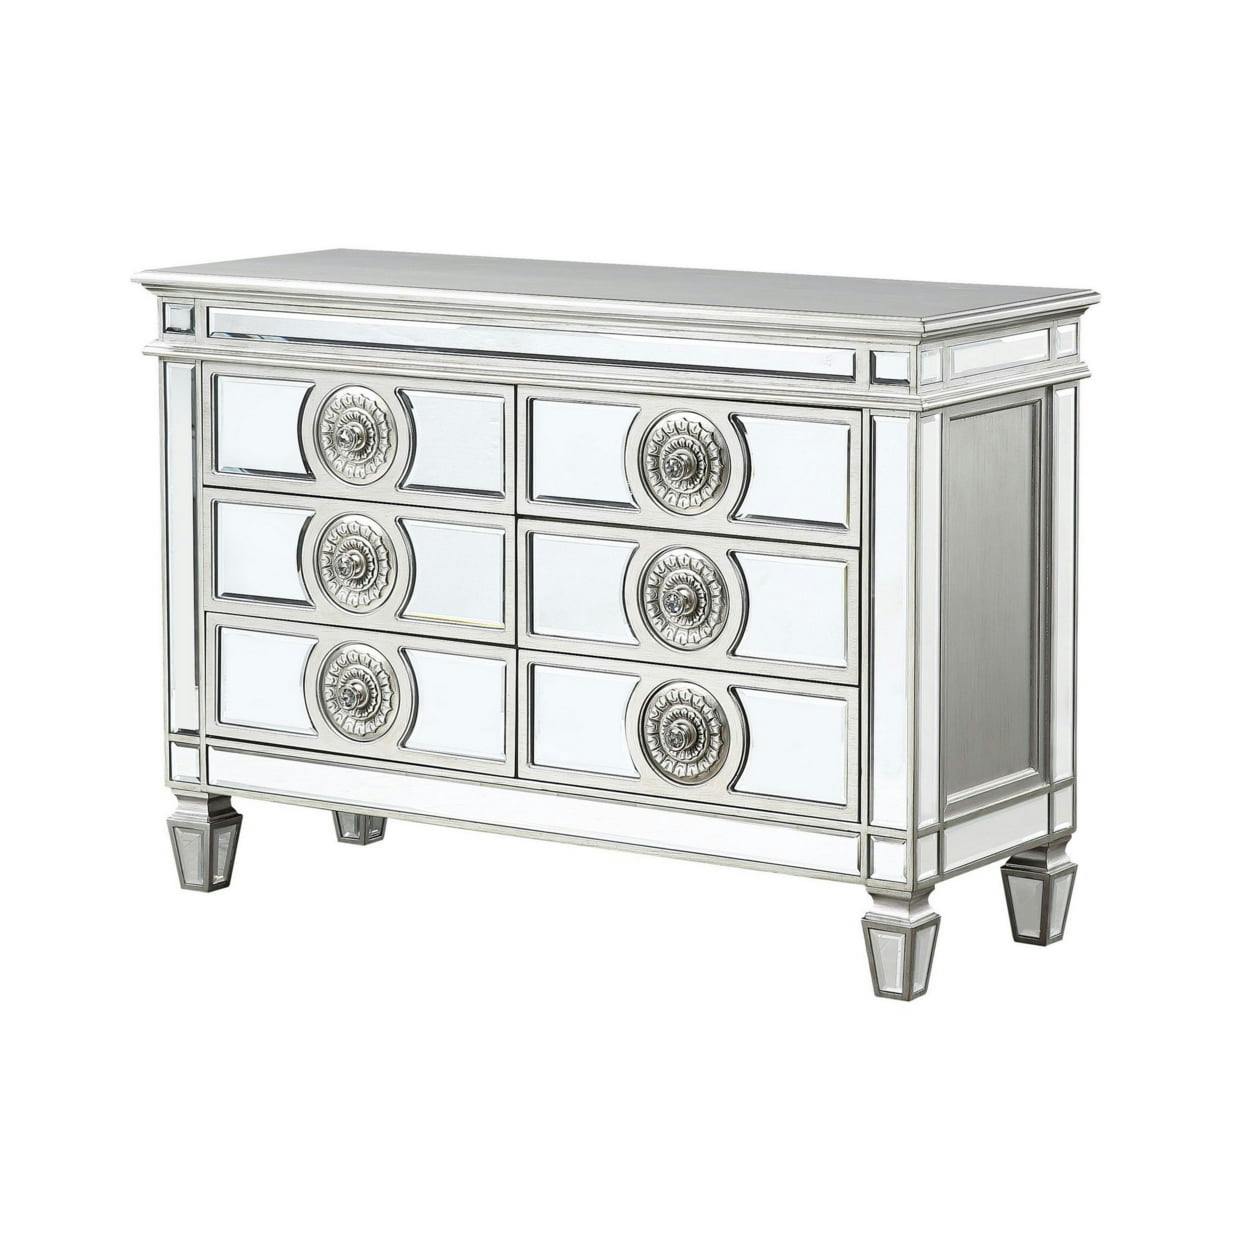 Elegant Silver Mirrored Server with Medallion Front and 6 Drawers